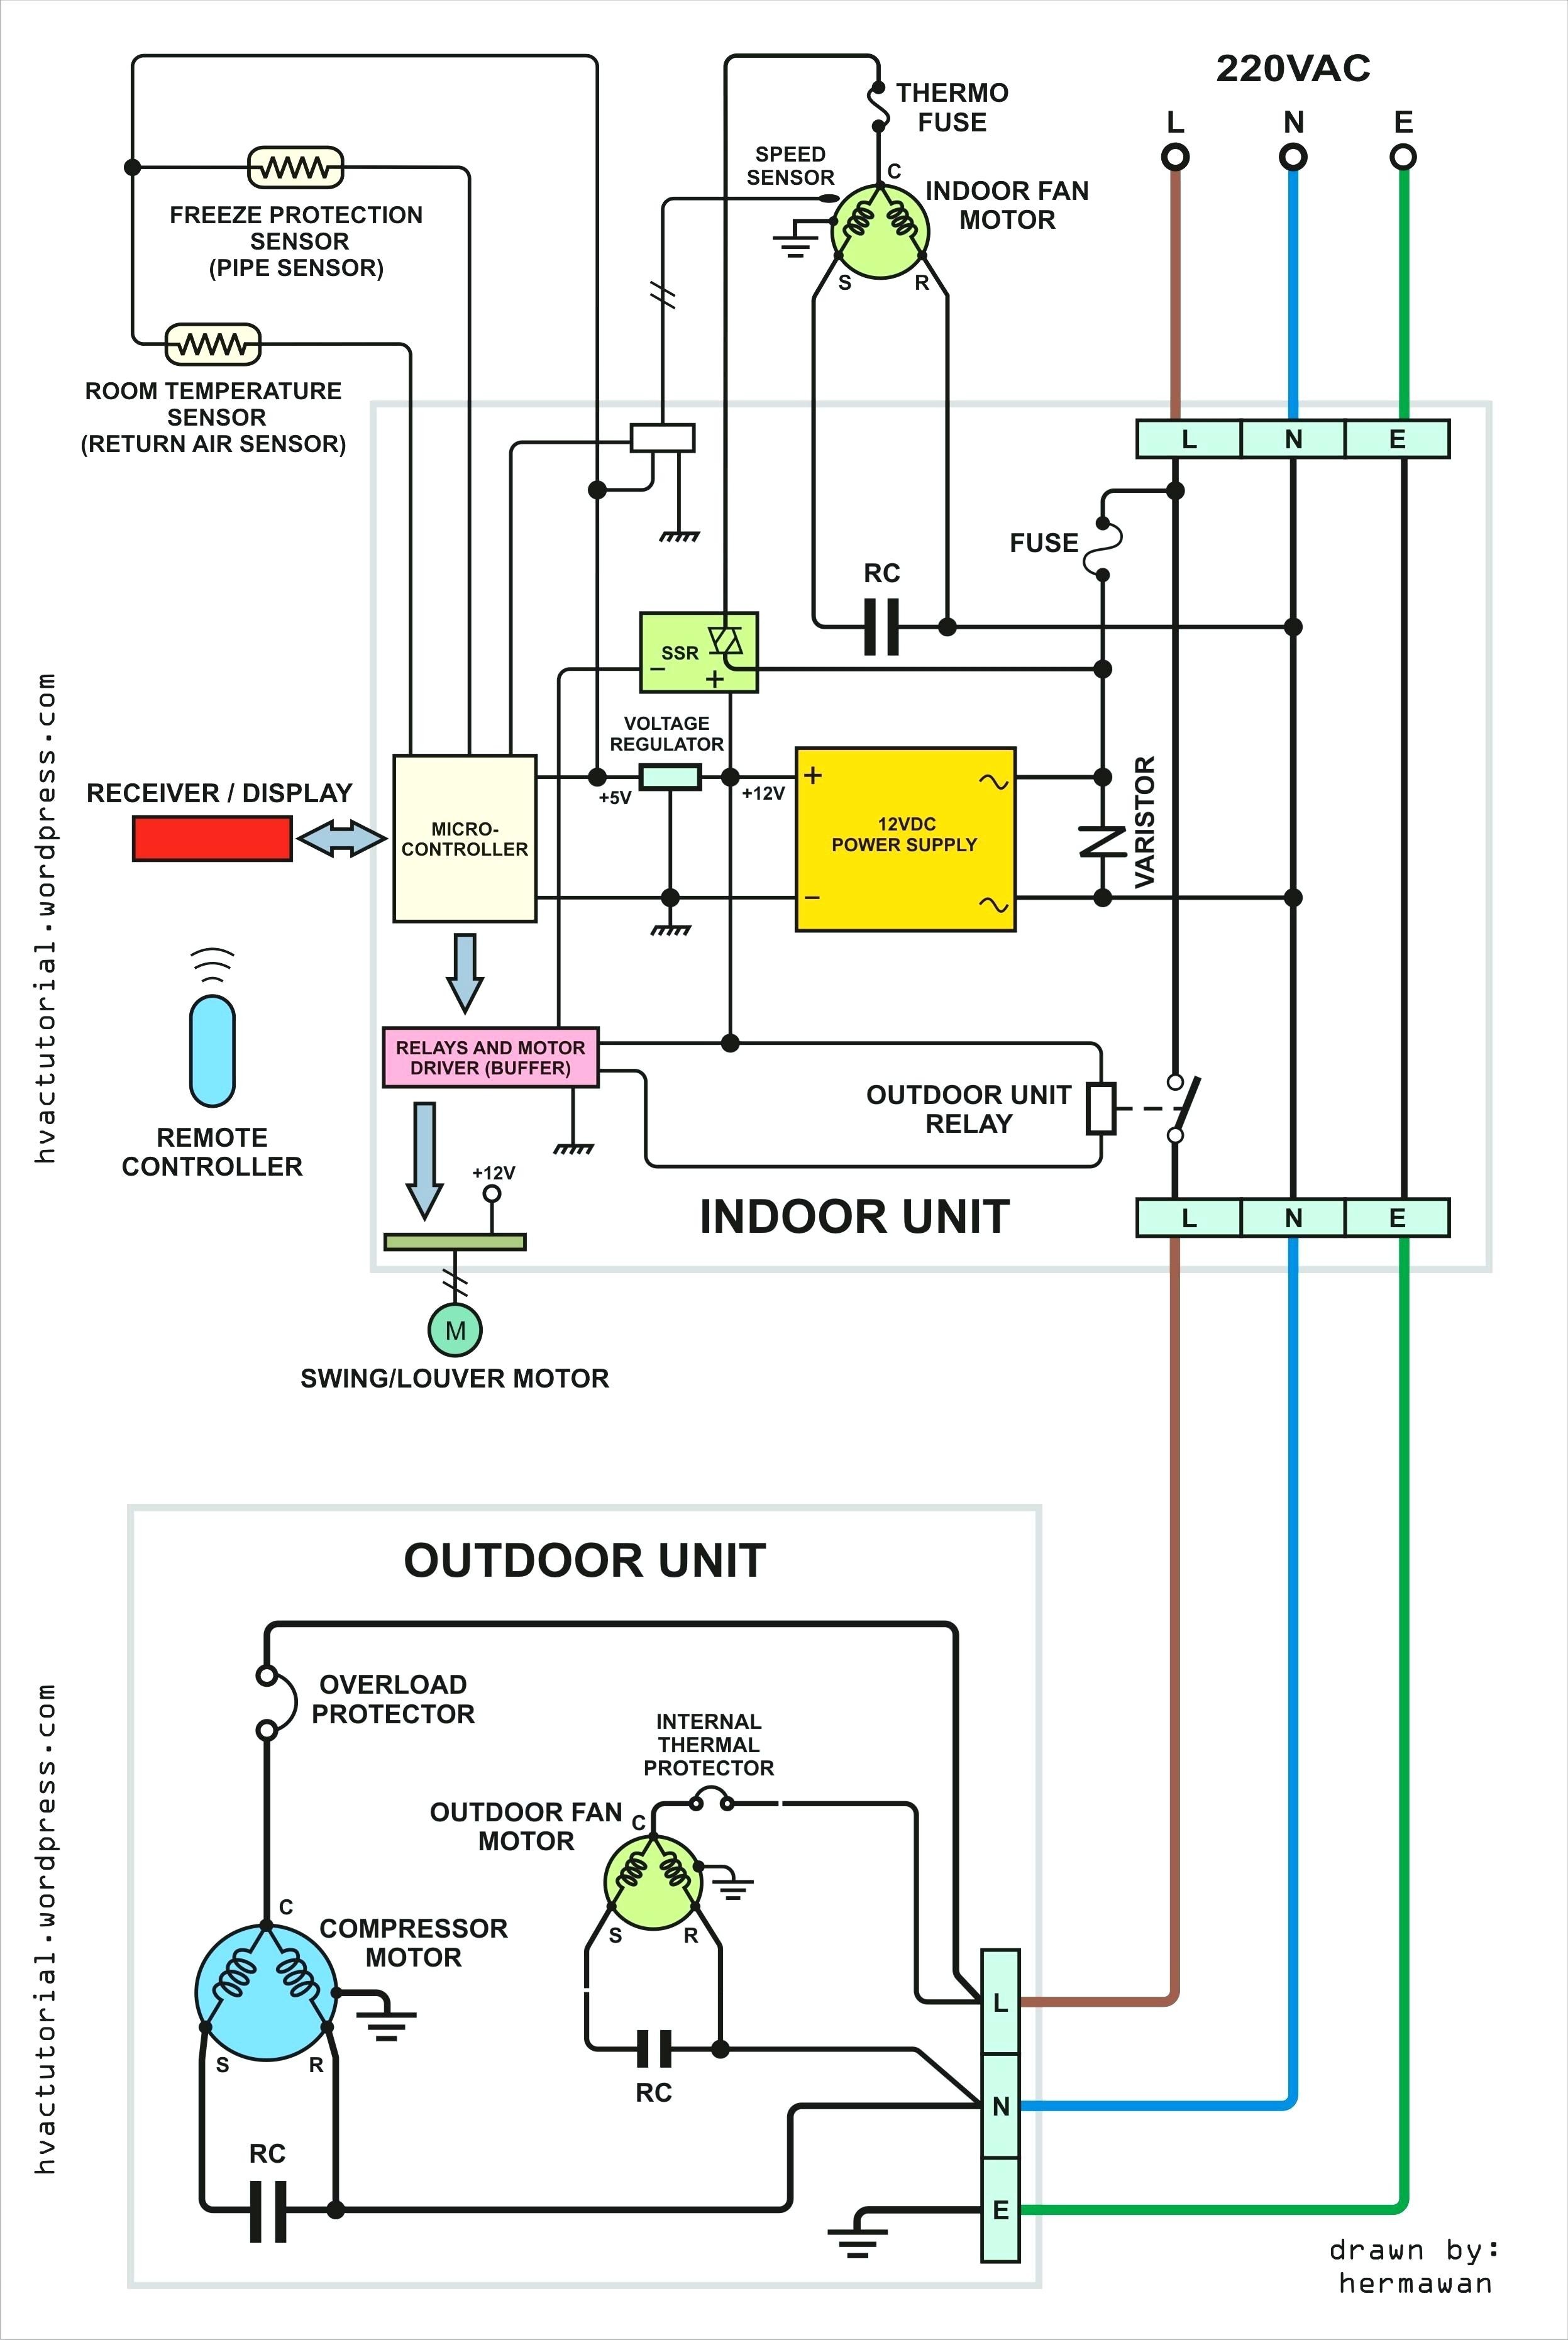 Wiring Diagram for Furnace Best Diagram Old Lennox thermostat Wiring Diagram Furnace Me at Old